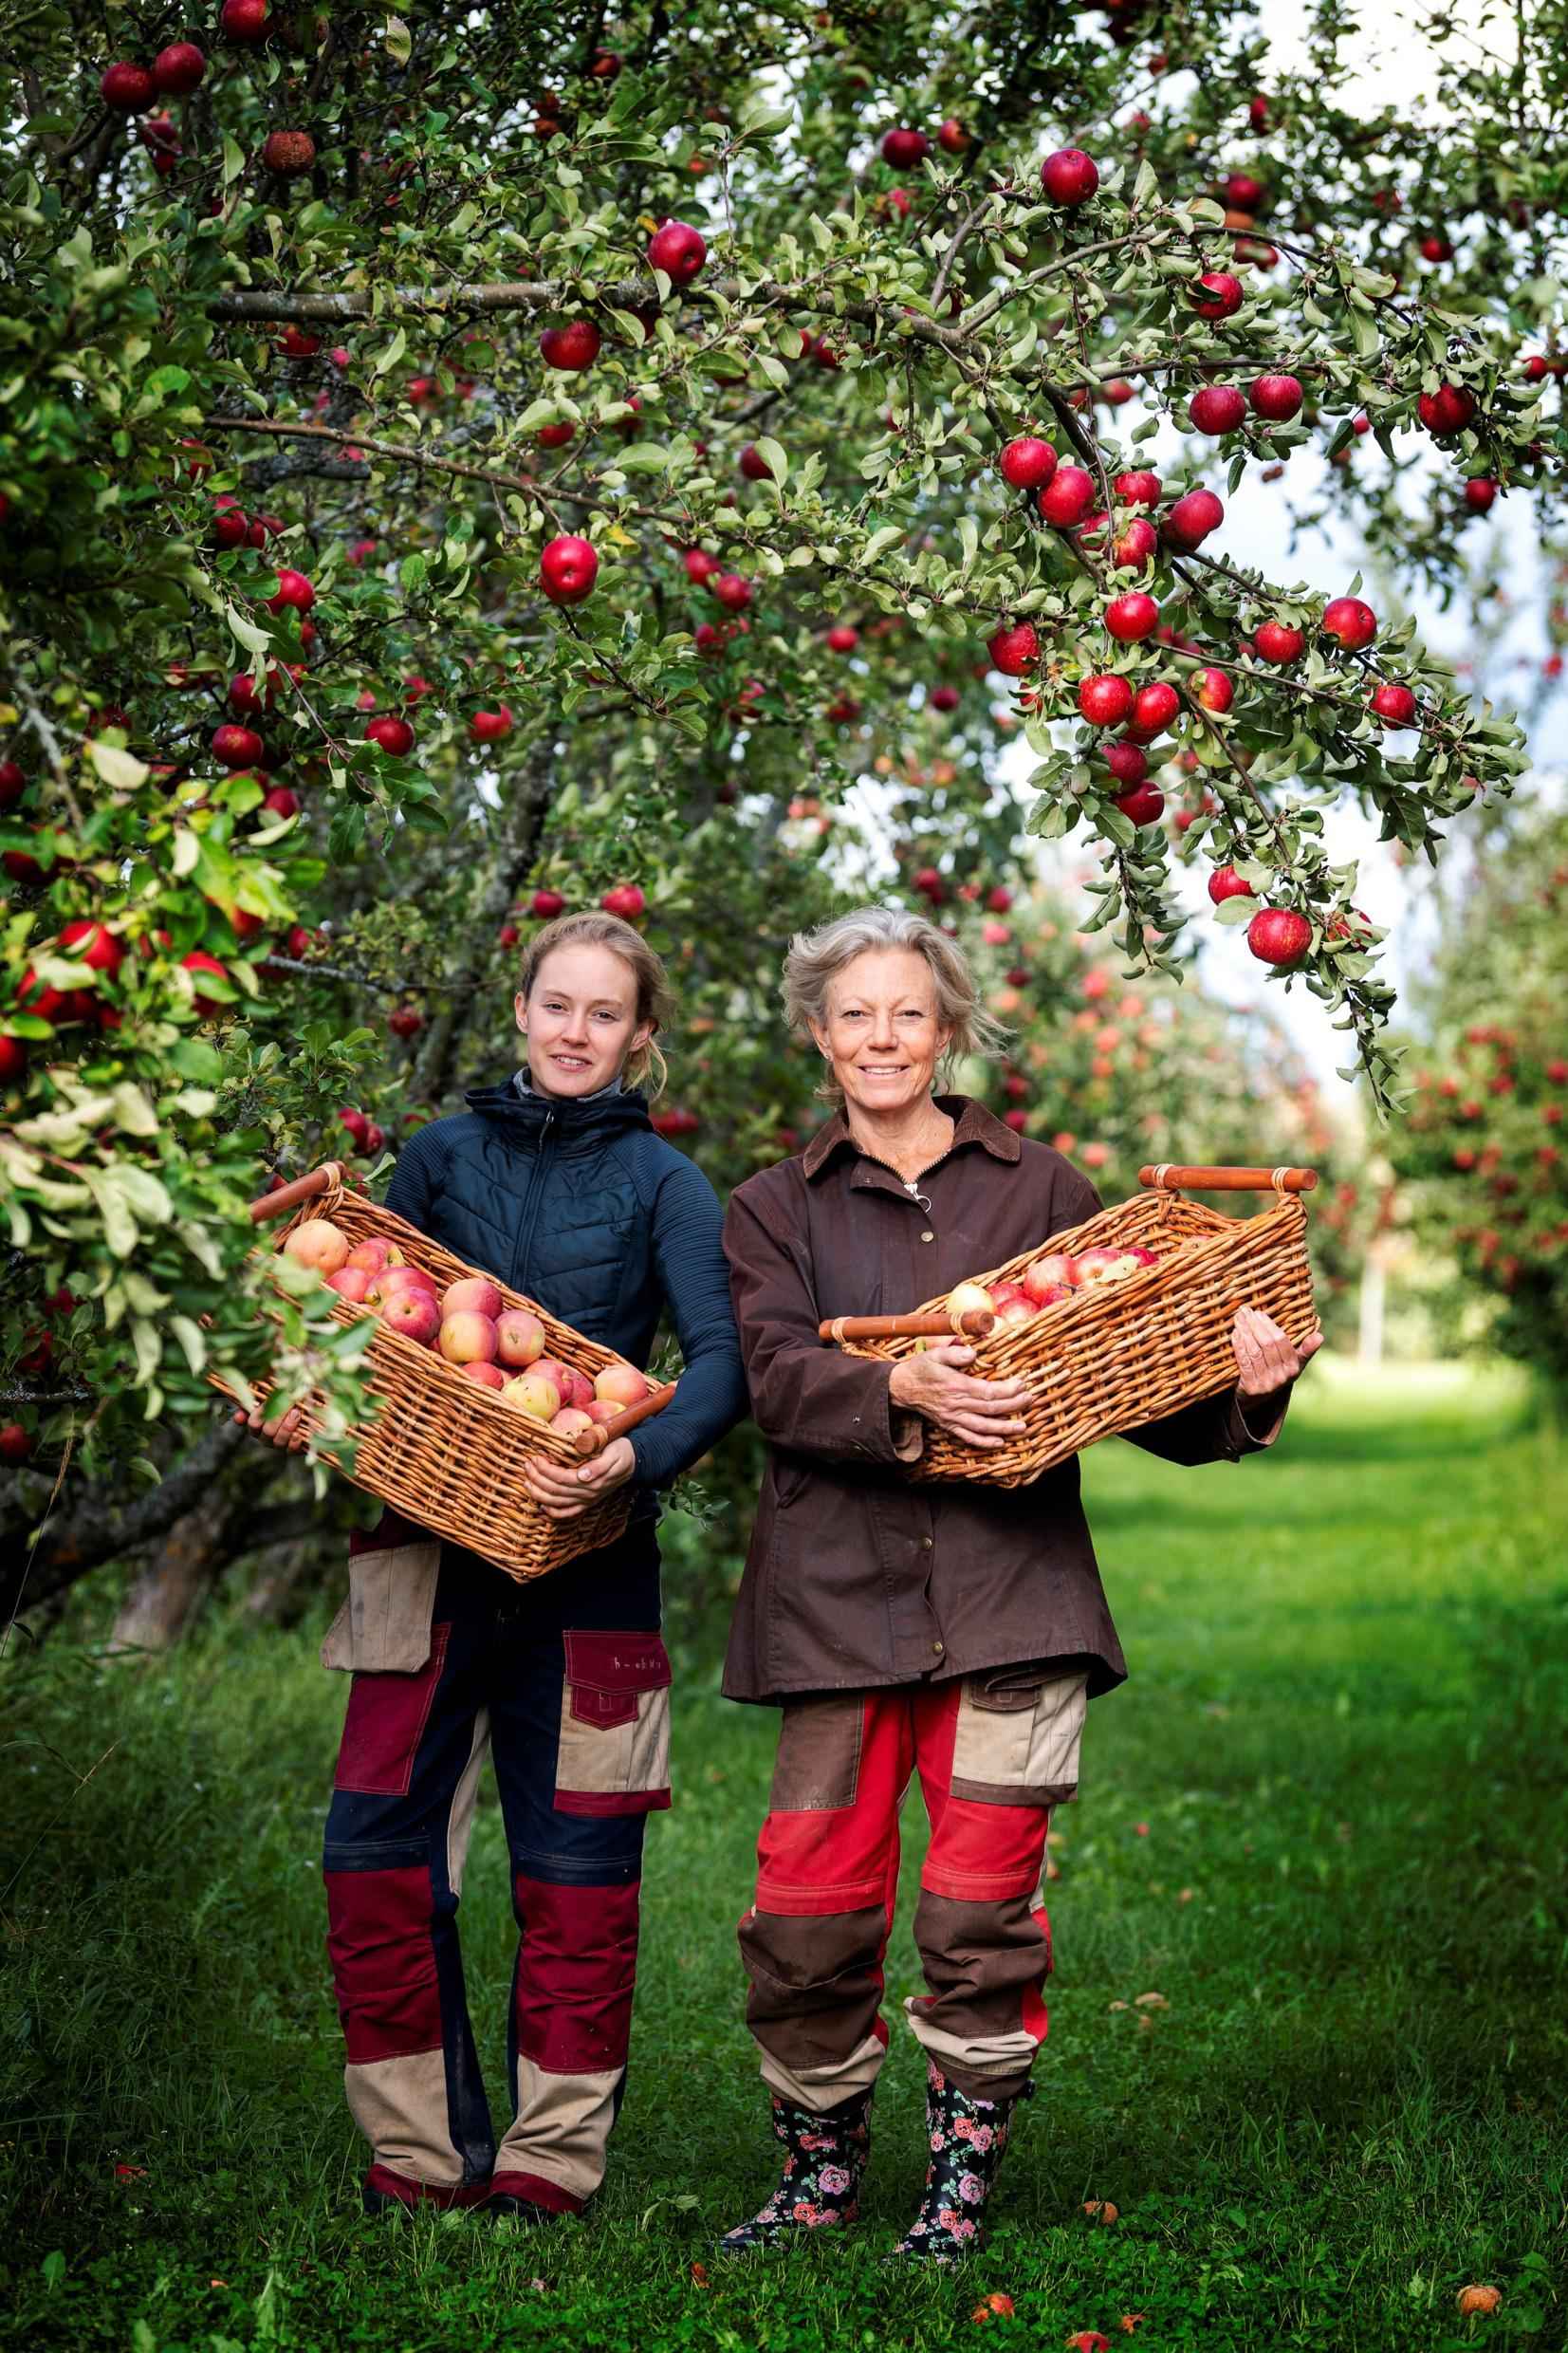 The mother and daughter of Köpings Musteri are holding baskets filled with red apples. They are standing outside in their apple orchards.